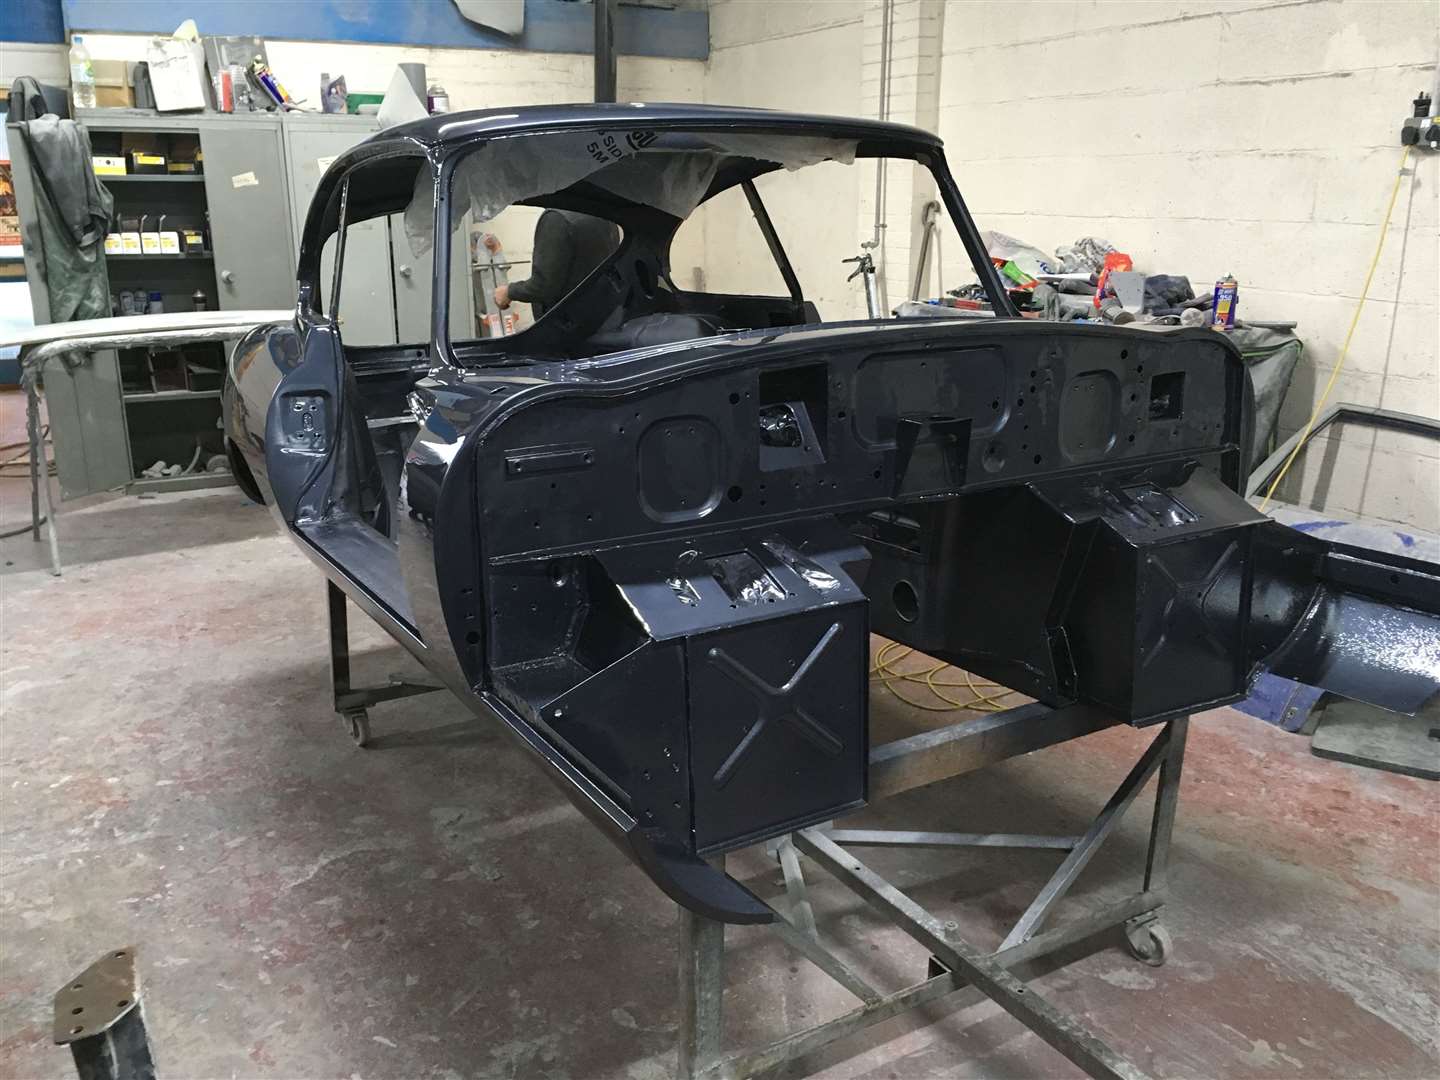 The E-Type’s bodywork has been completely resprayed.